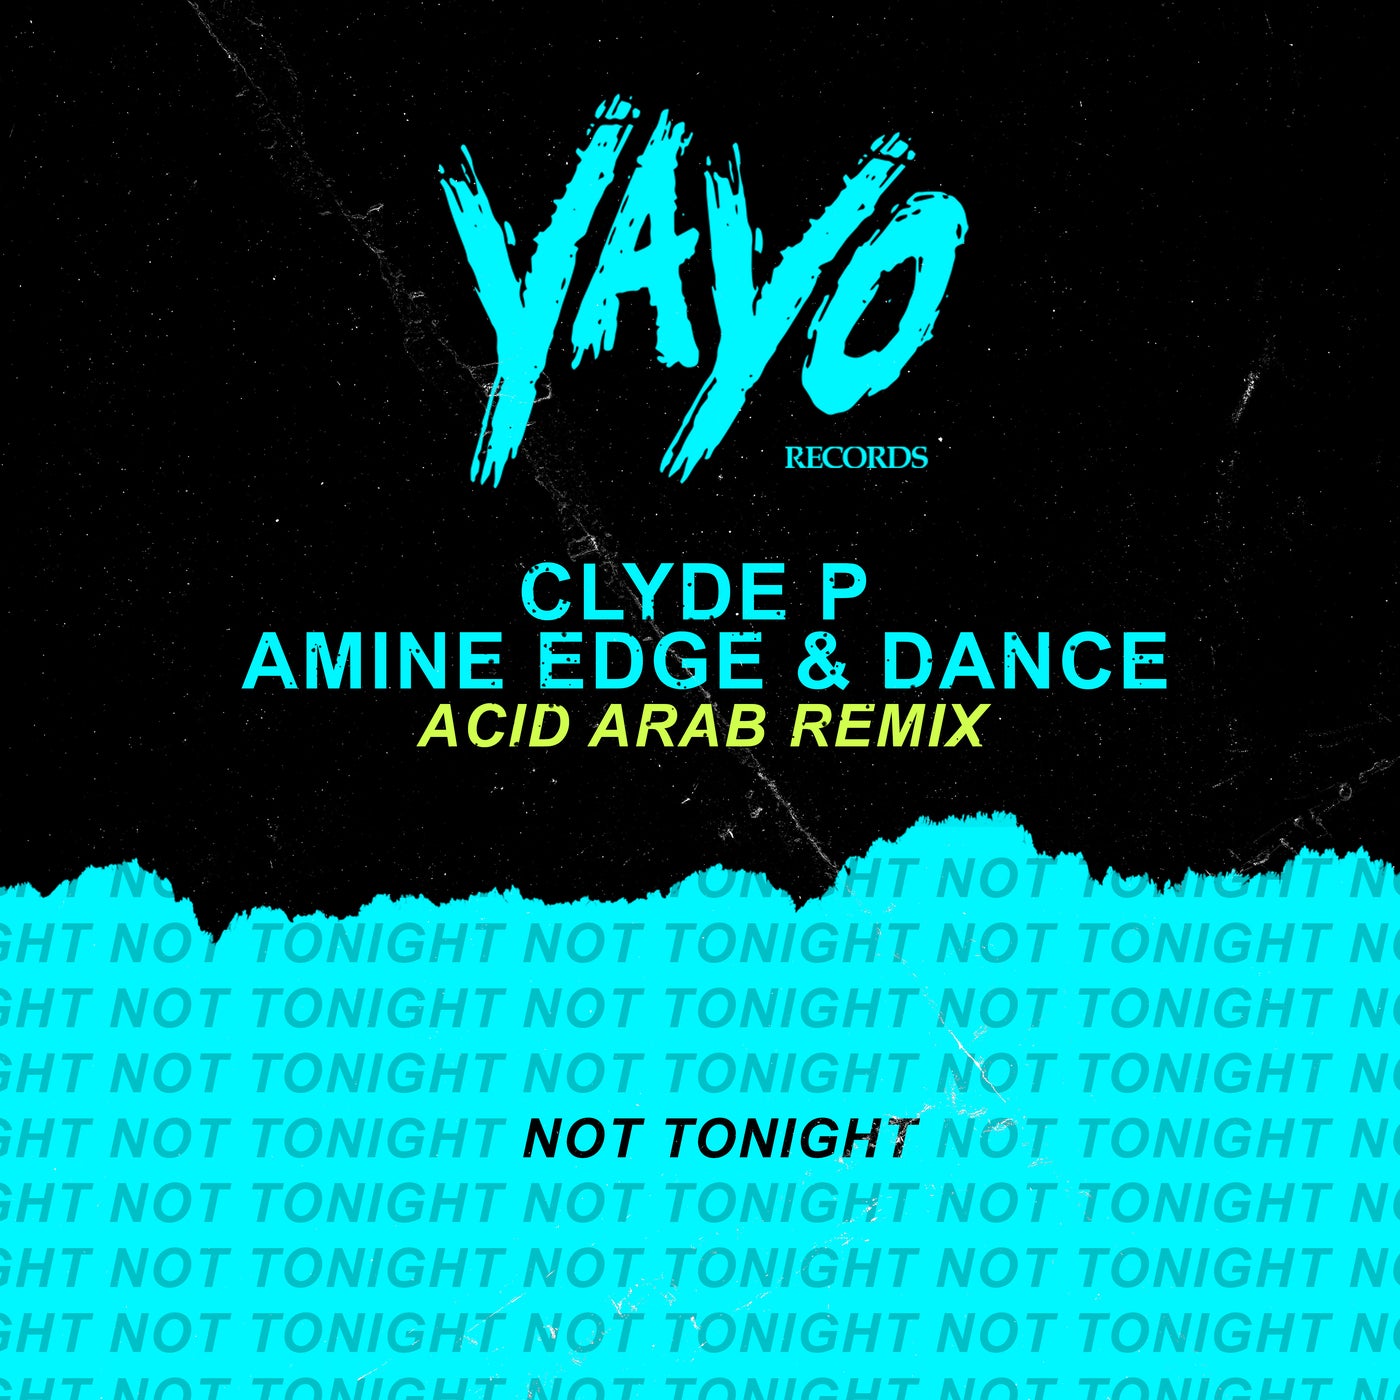 image cover: Clyde P, Amine Edge & DANCE - Not Tonight on YAYO Records